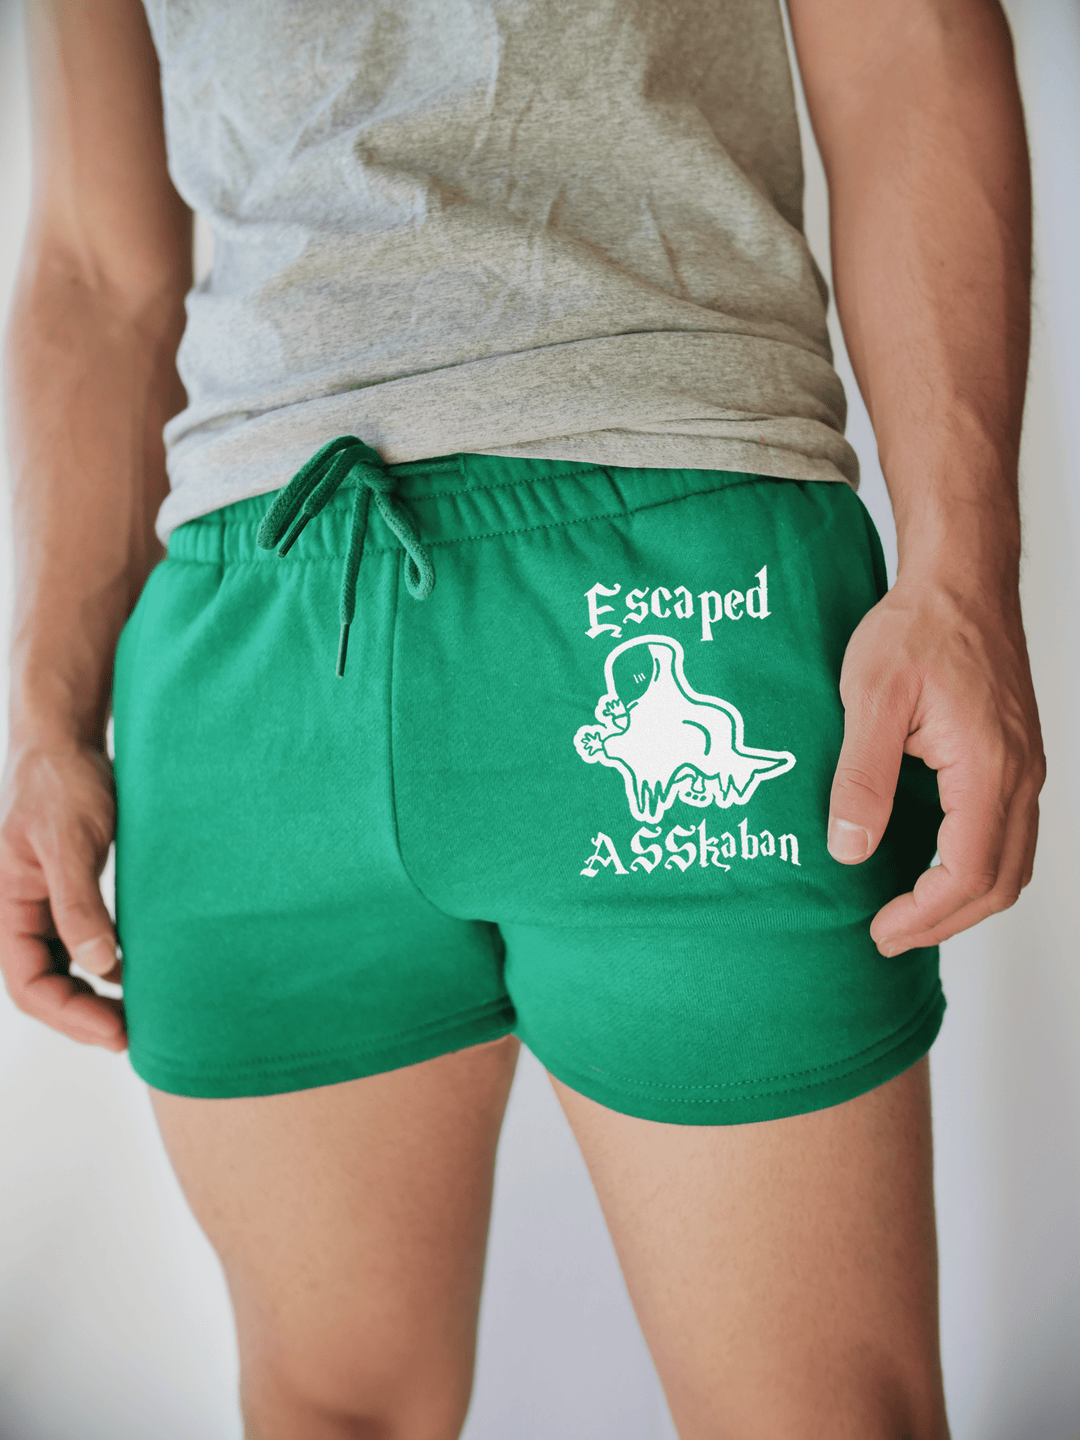 PixelThat Punderwear Shorts Kelly Green / S / Front Escaped ASSkaban Men's Gym Shorts